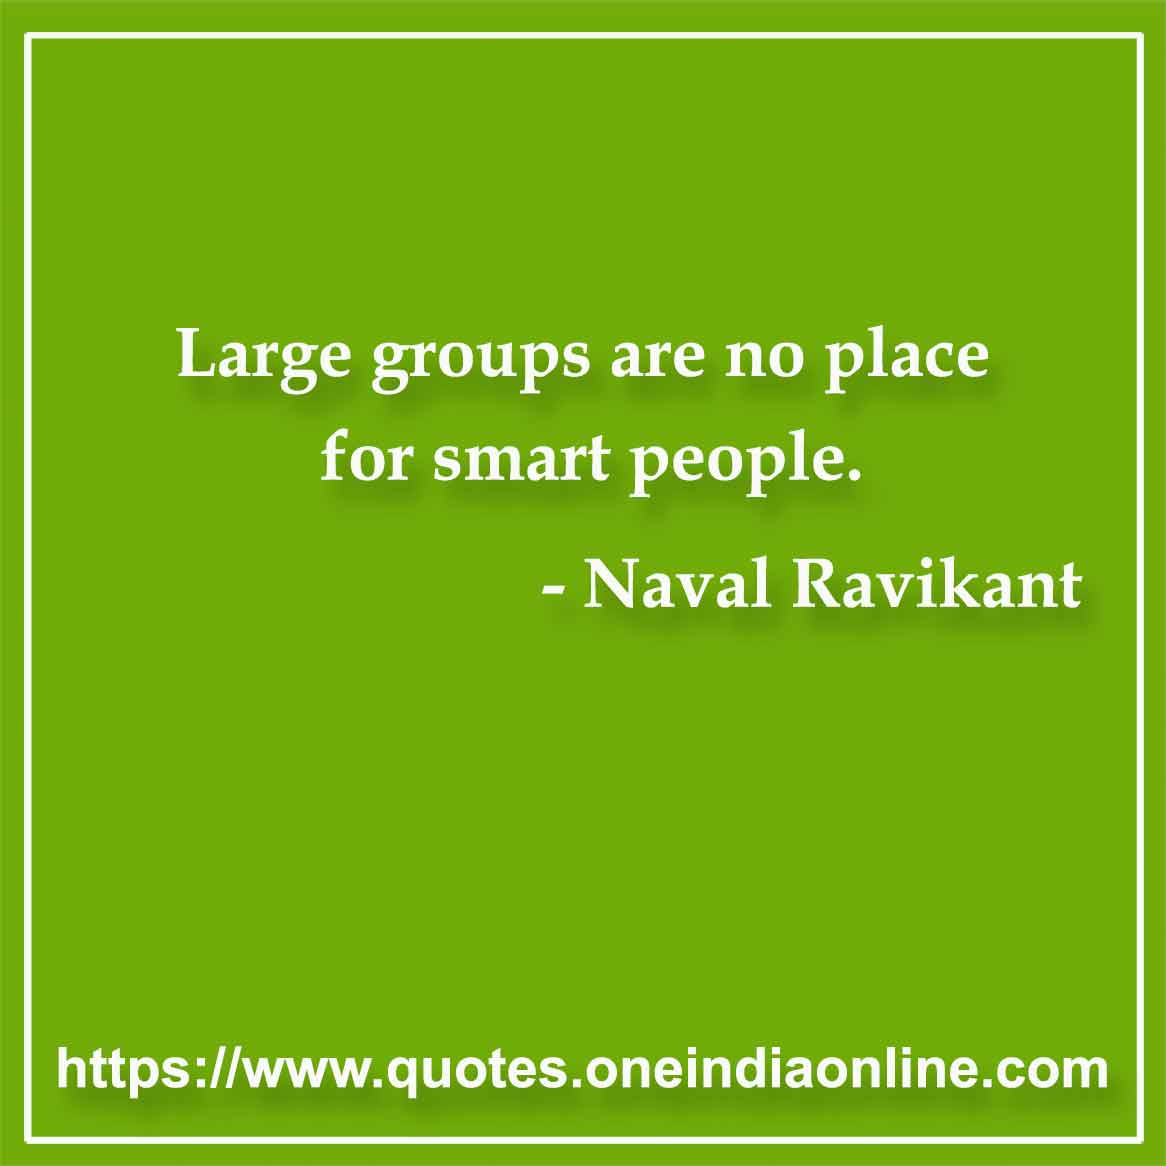 Large groups are no place for smart people. 

- Naval Ravikant